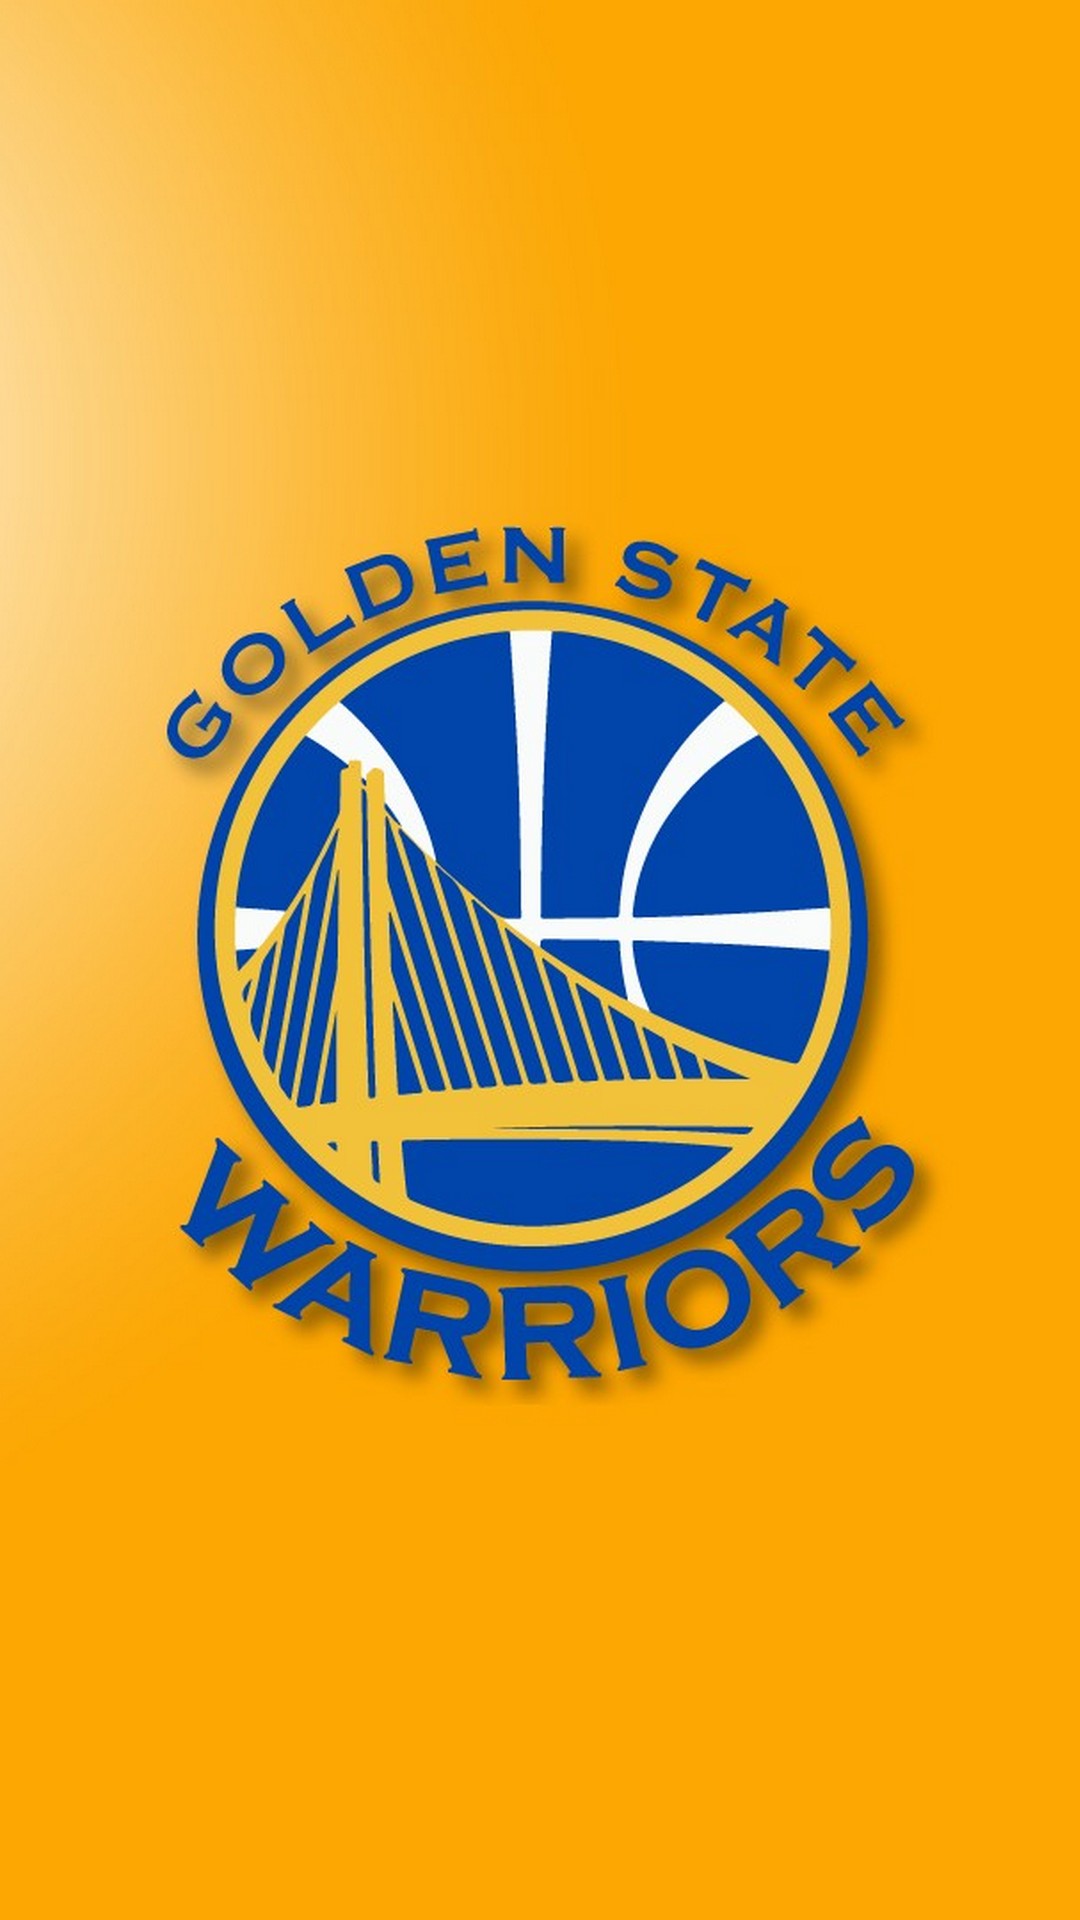 iPhone 8 Wallpaper Golden State Warriors with image resolution 1080x1920 pixel. You can make this wallpaper for your iPhone 5, 6, 7, 8, X backgrounds, Mobile Screensaver, or iPad Lock Screen